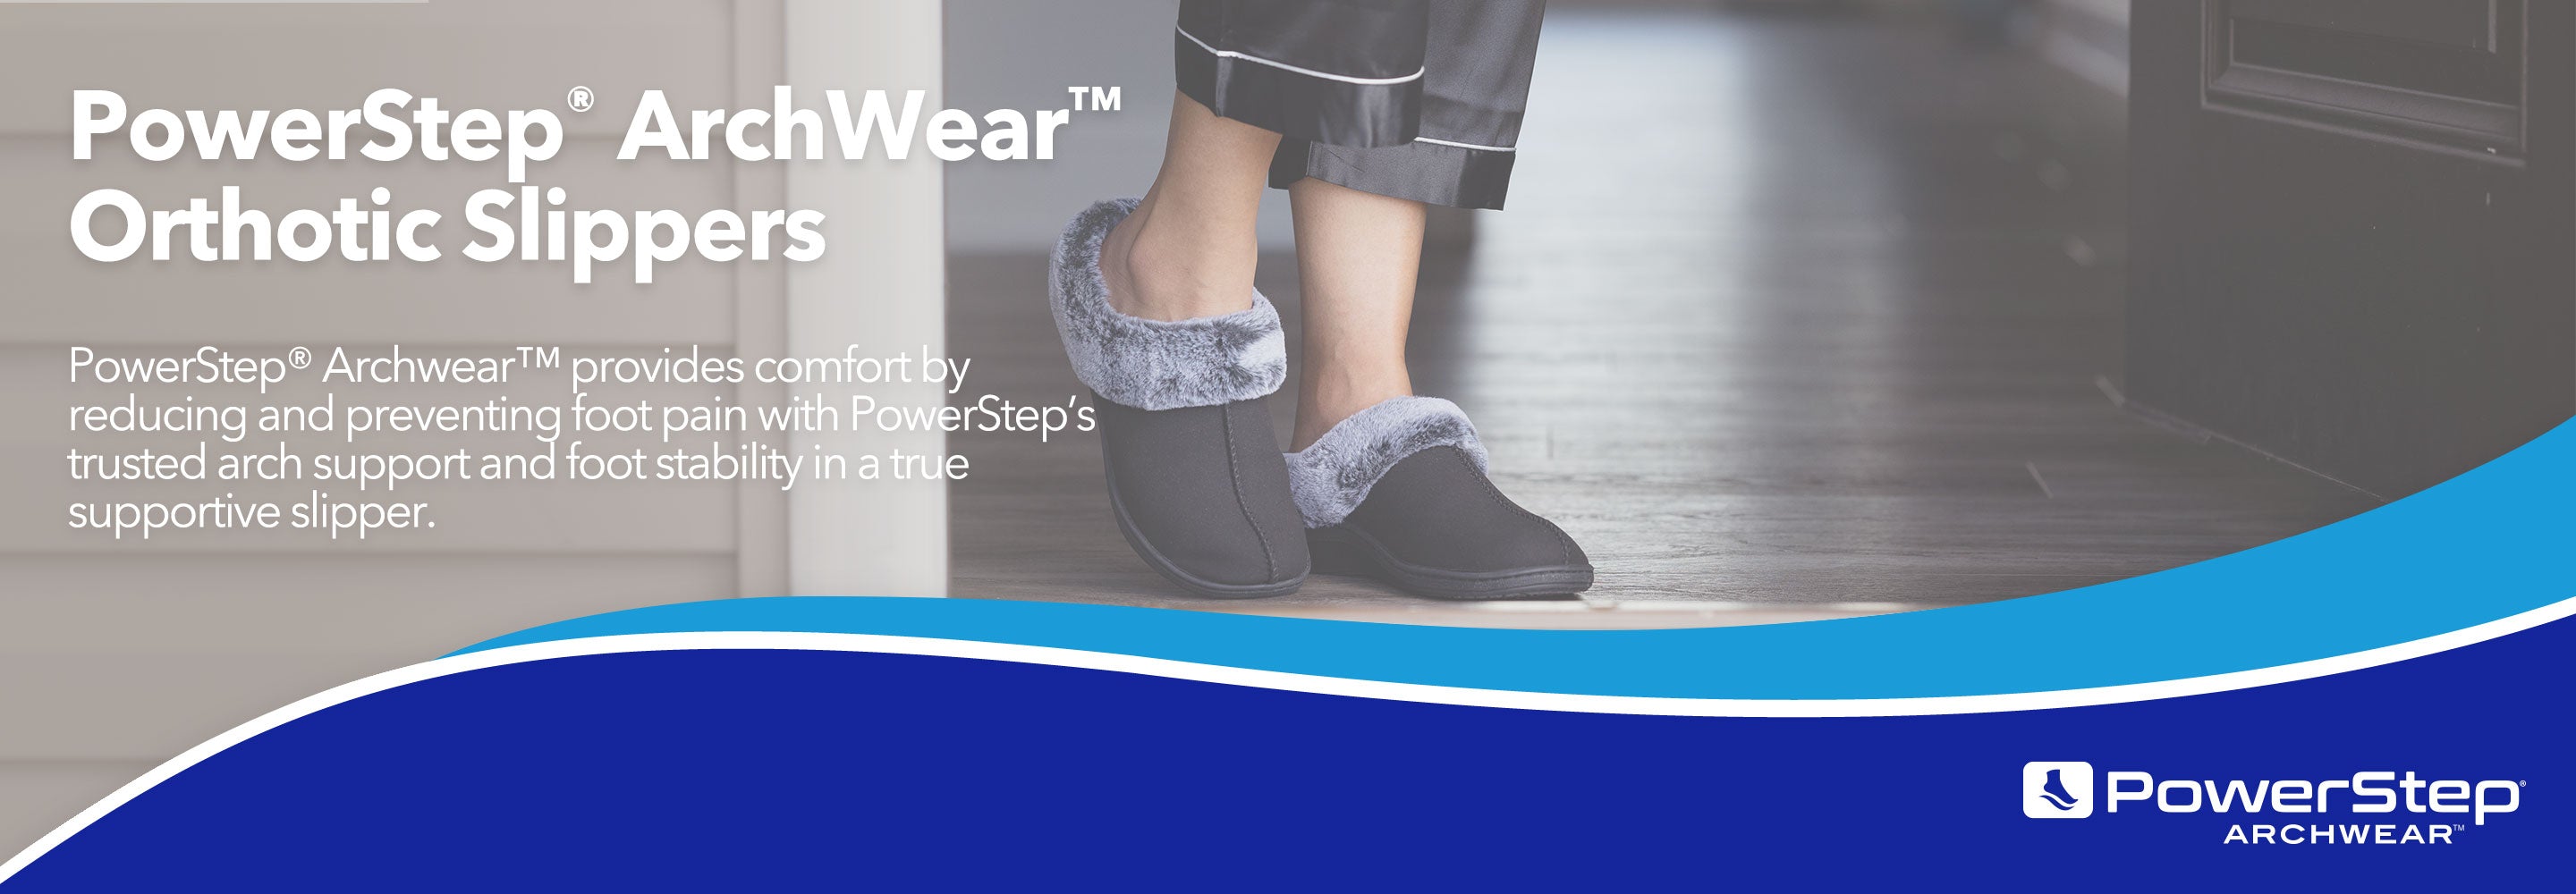 PowerStep ArchWear Orthotic Clog Supportive Slippers for Women